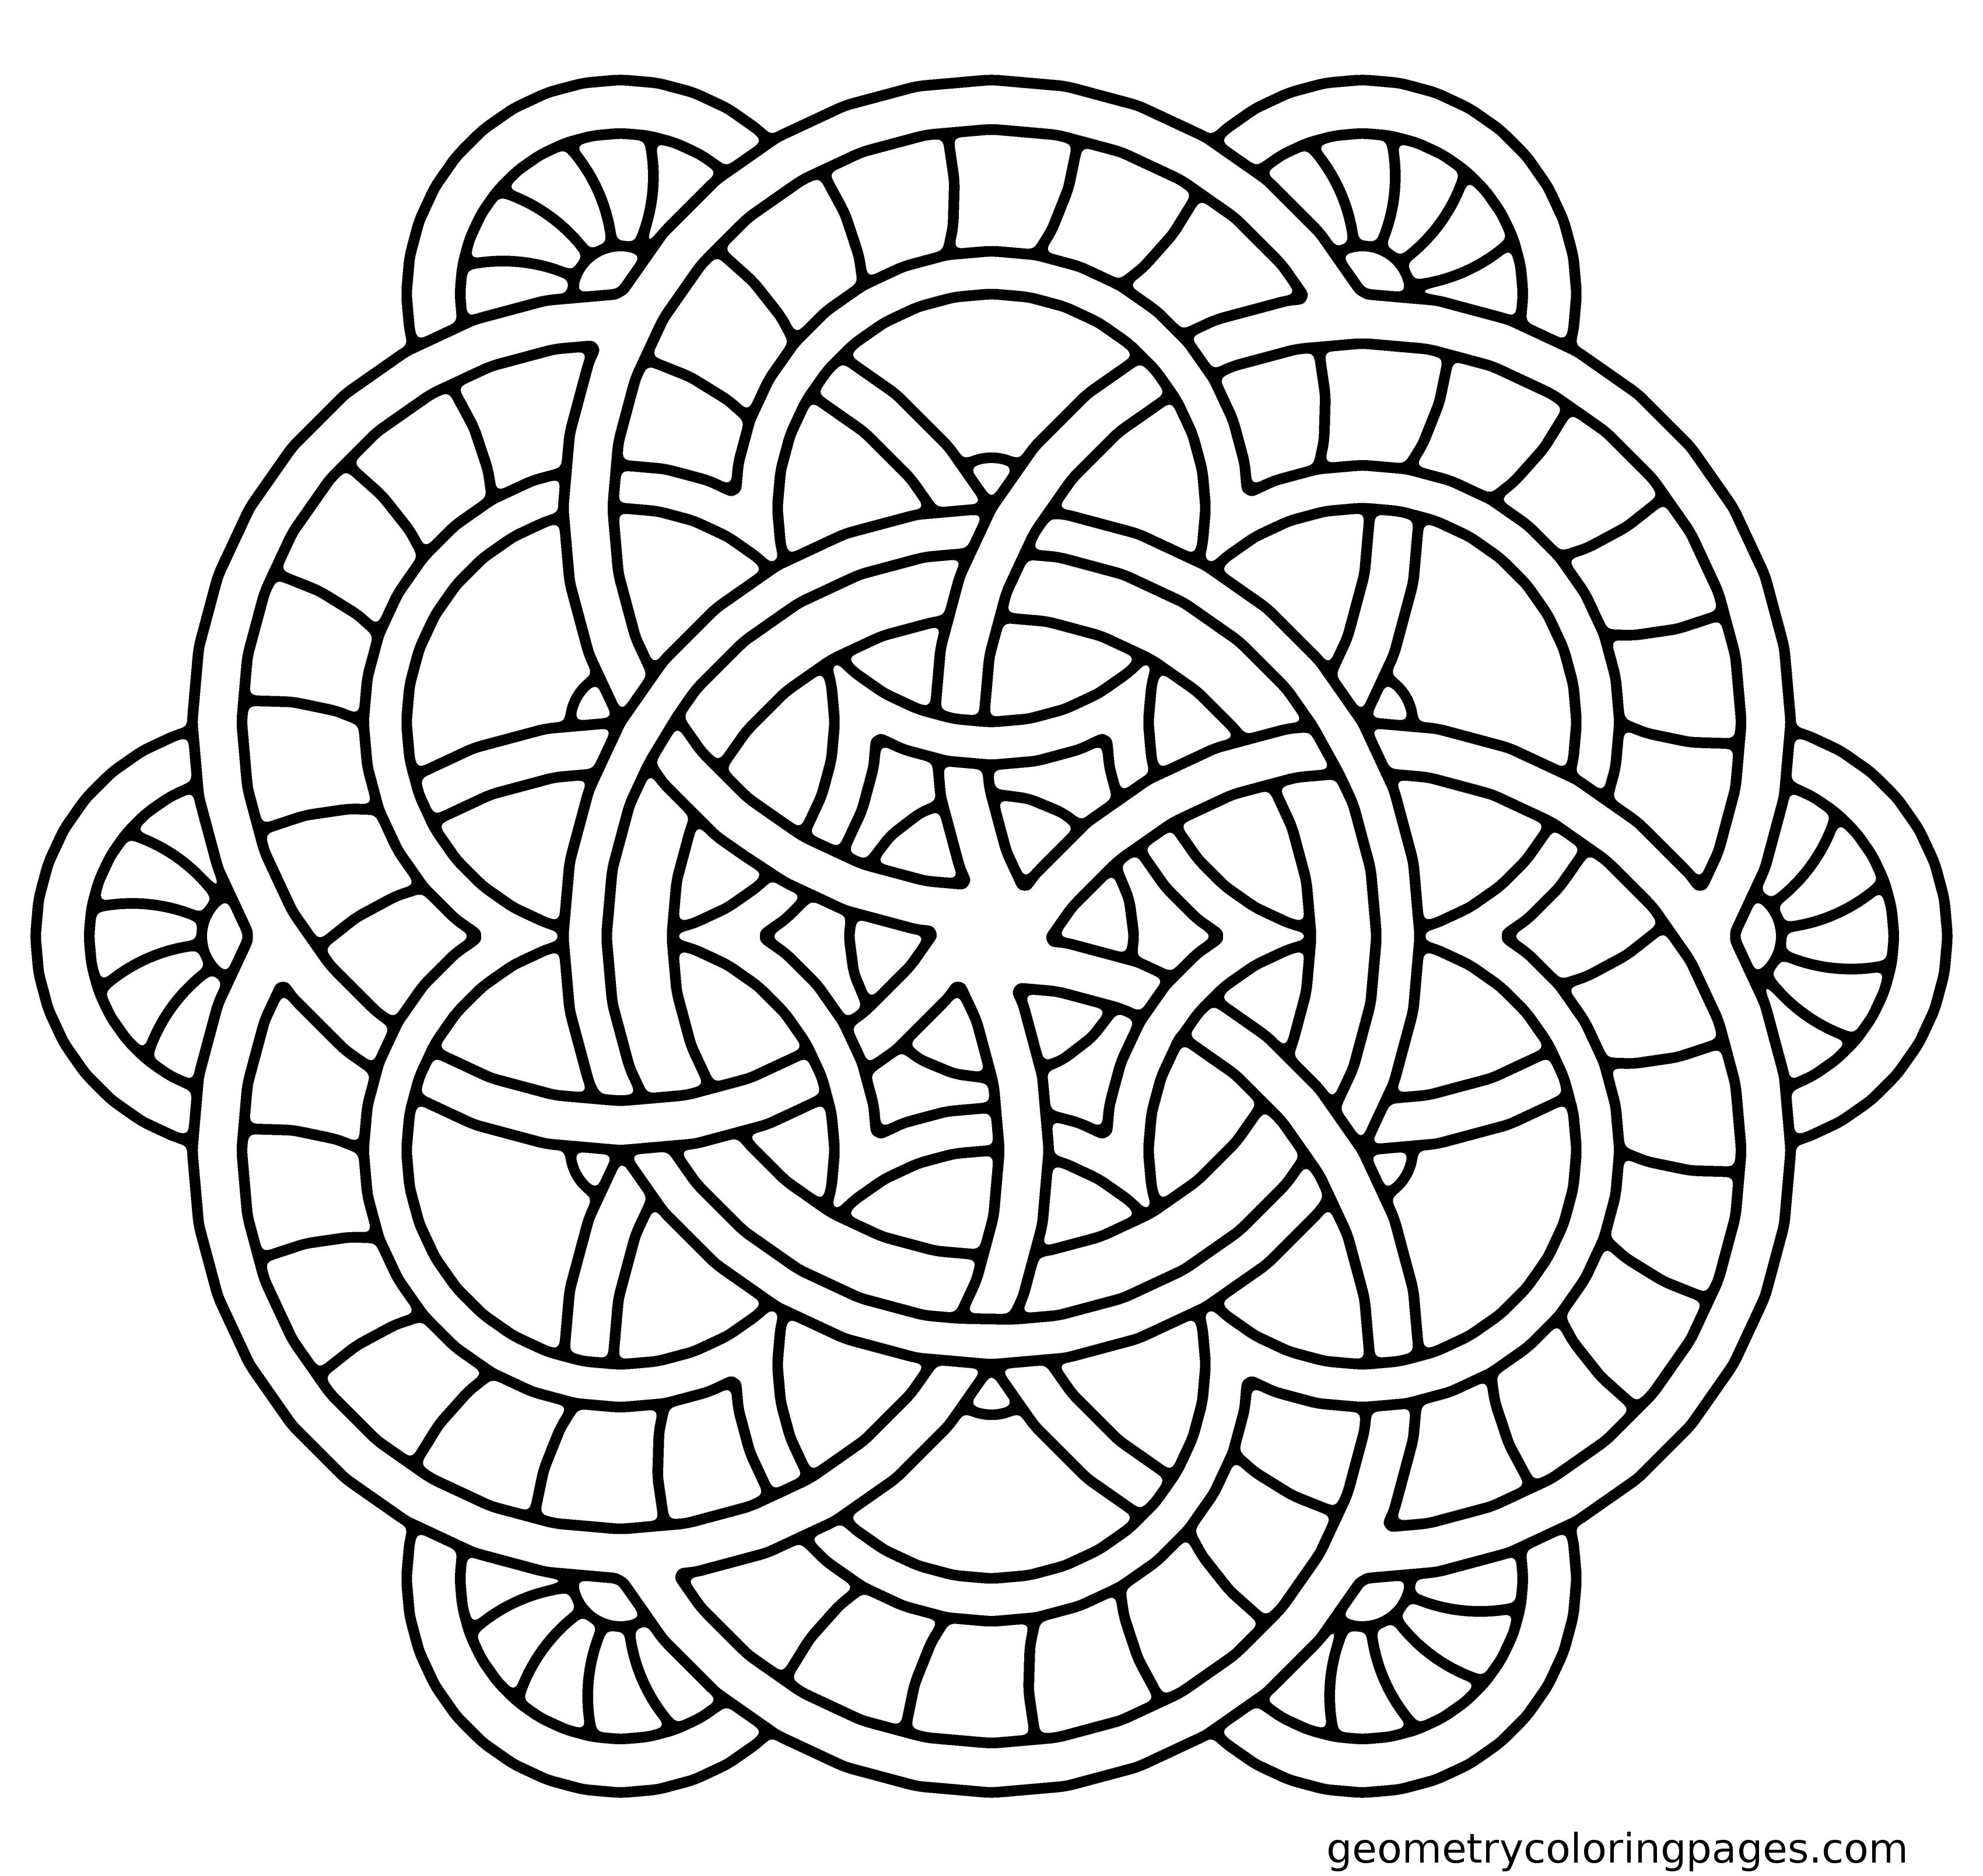 Coloring Ideas : Mandala Coloring Pages For Adults Free Printable X - Mandala Coloring Free Printable